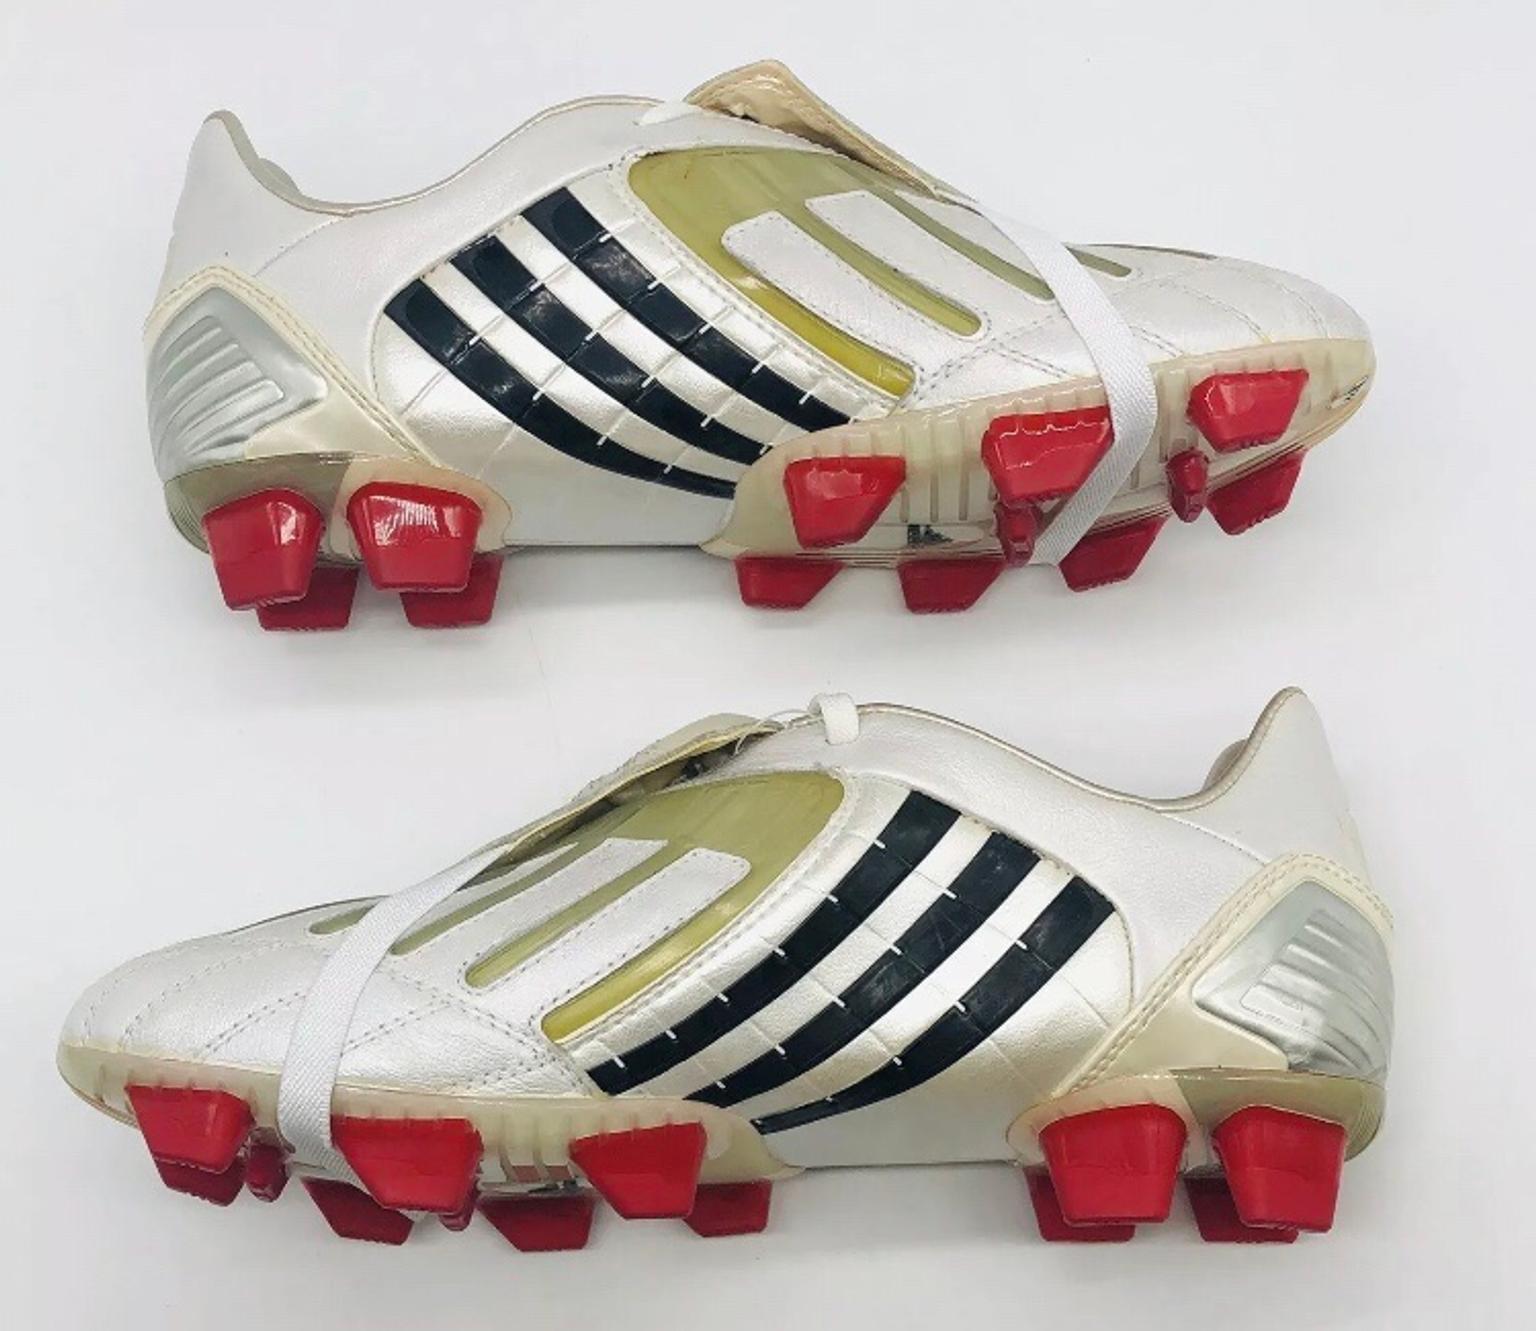 ADIDAS PREDATOR POWERSWERVE MID TIER FG UK7.5 in East Suffolk for £119.99  for sale | Shpock